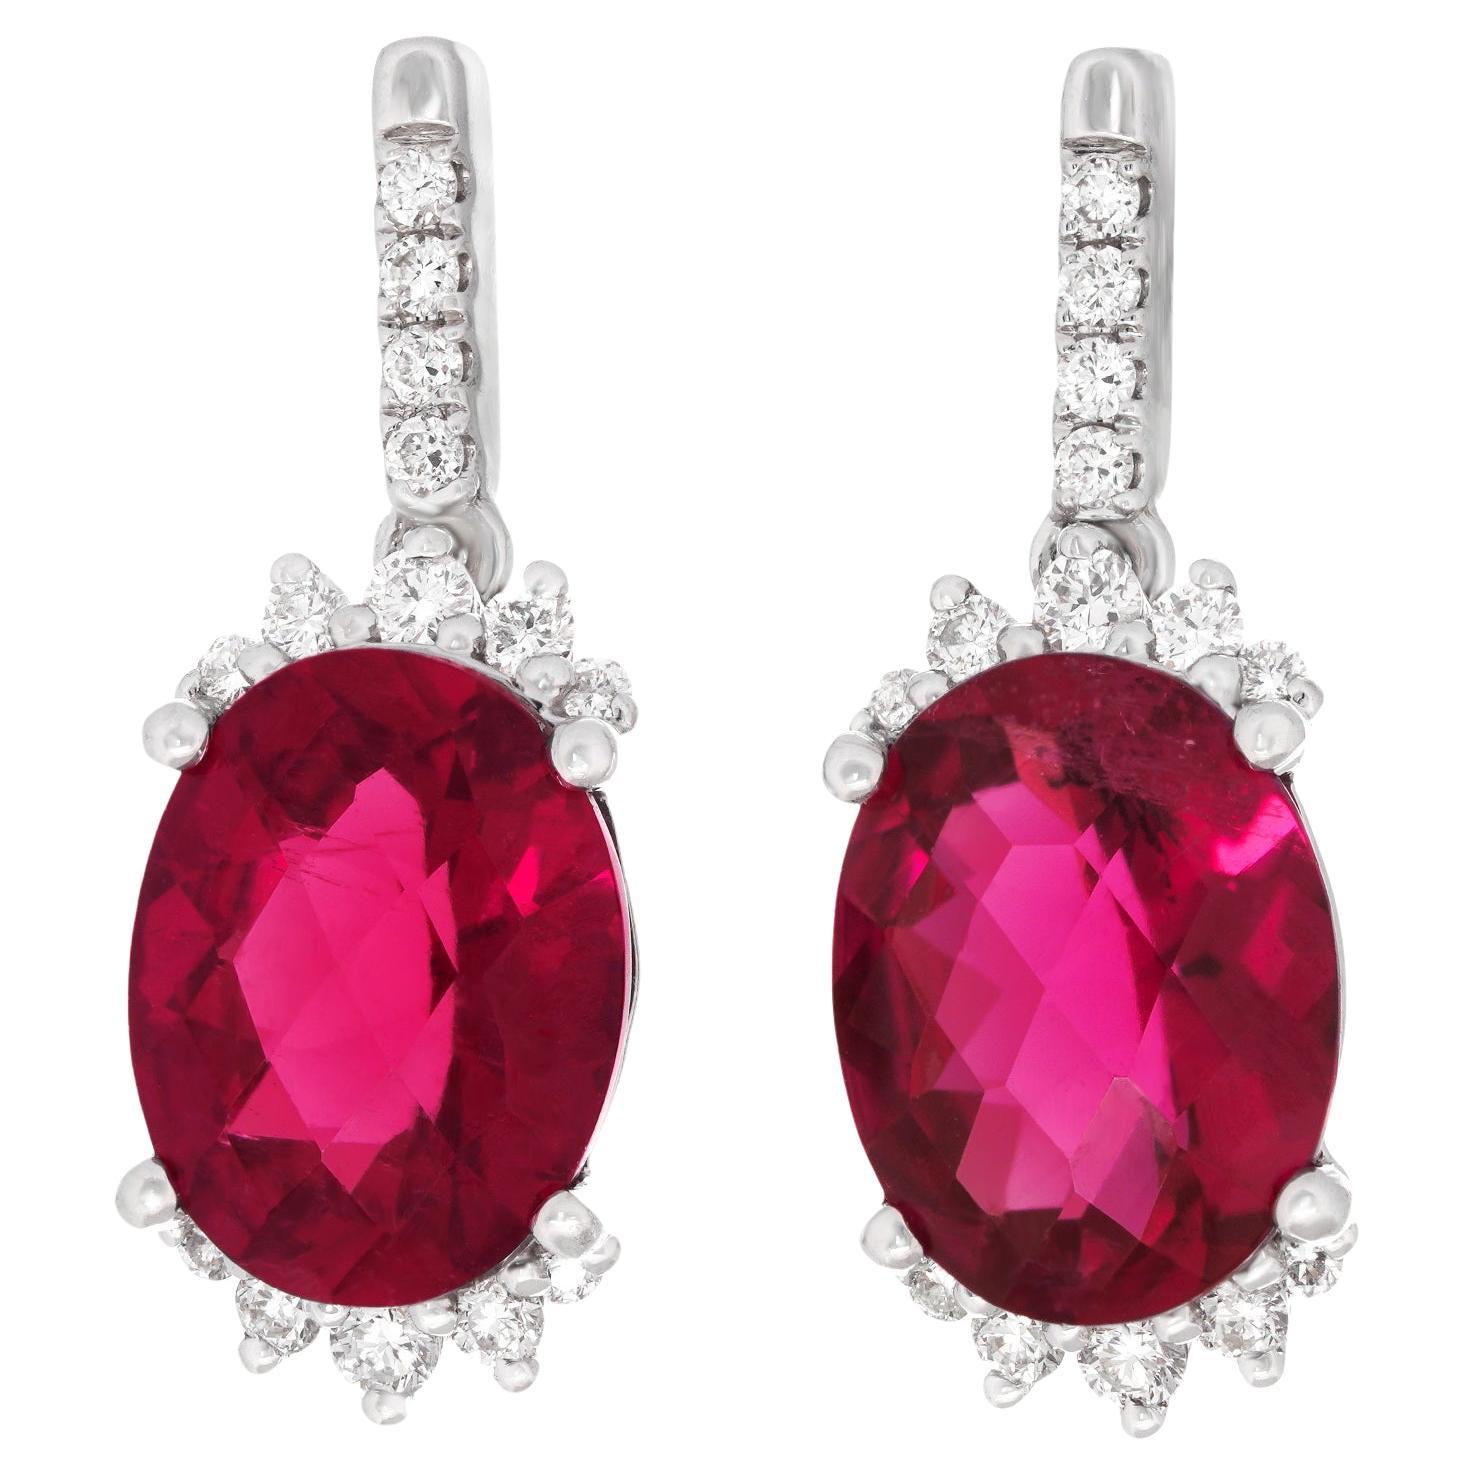 Red Tourmaline Earrings For Sale